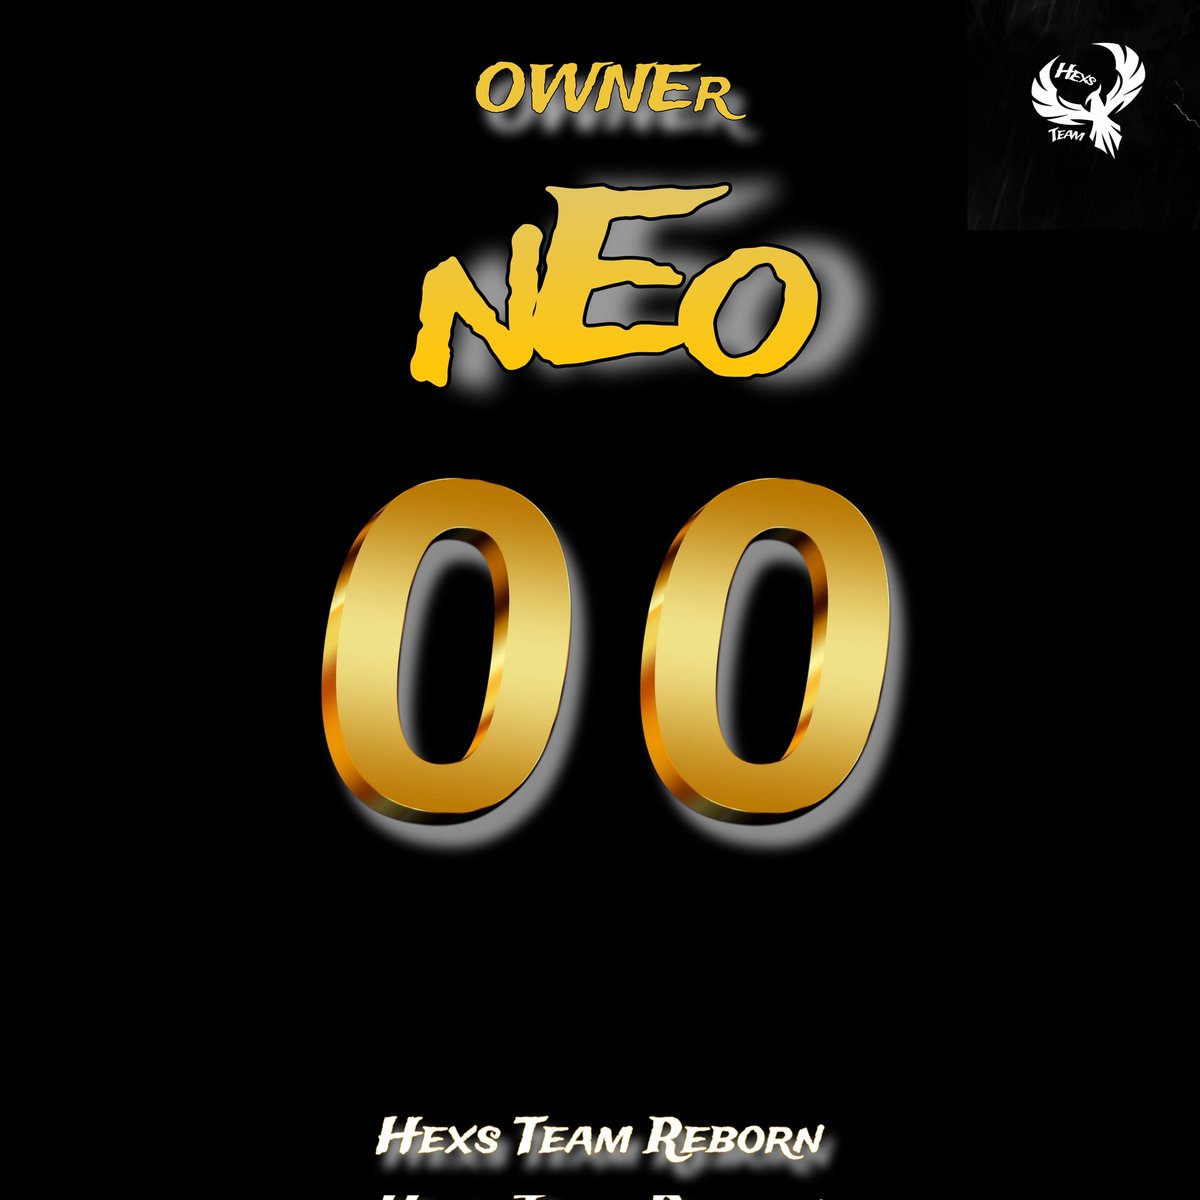 OWNERS OF THE NEW HEXS TEAM REBORN 

    00:zTa                                        00:nEo
 @new_zTa